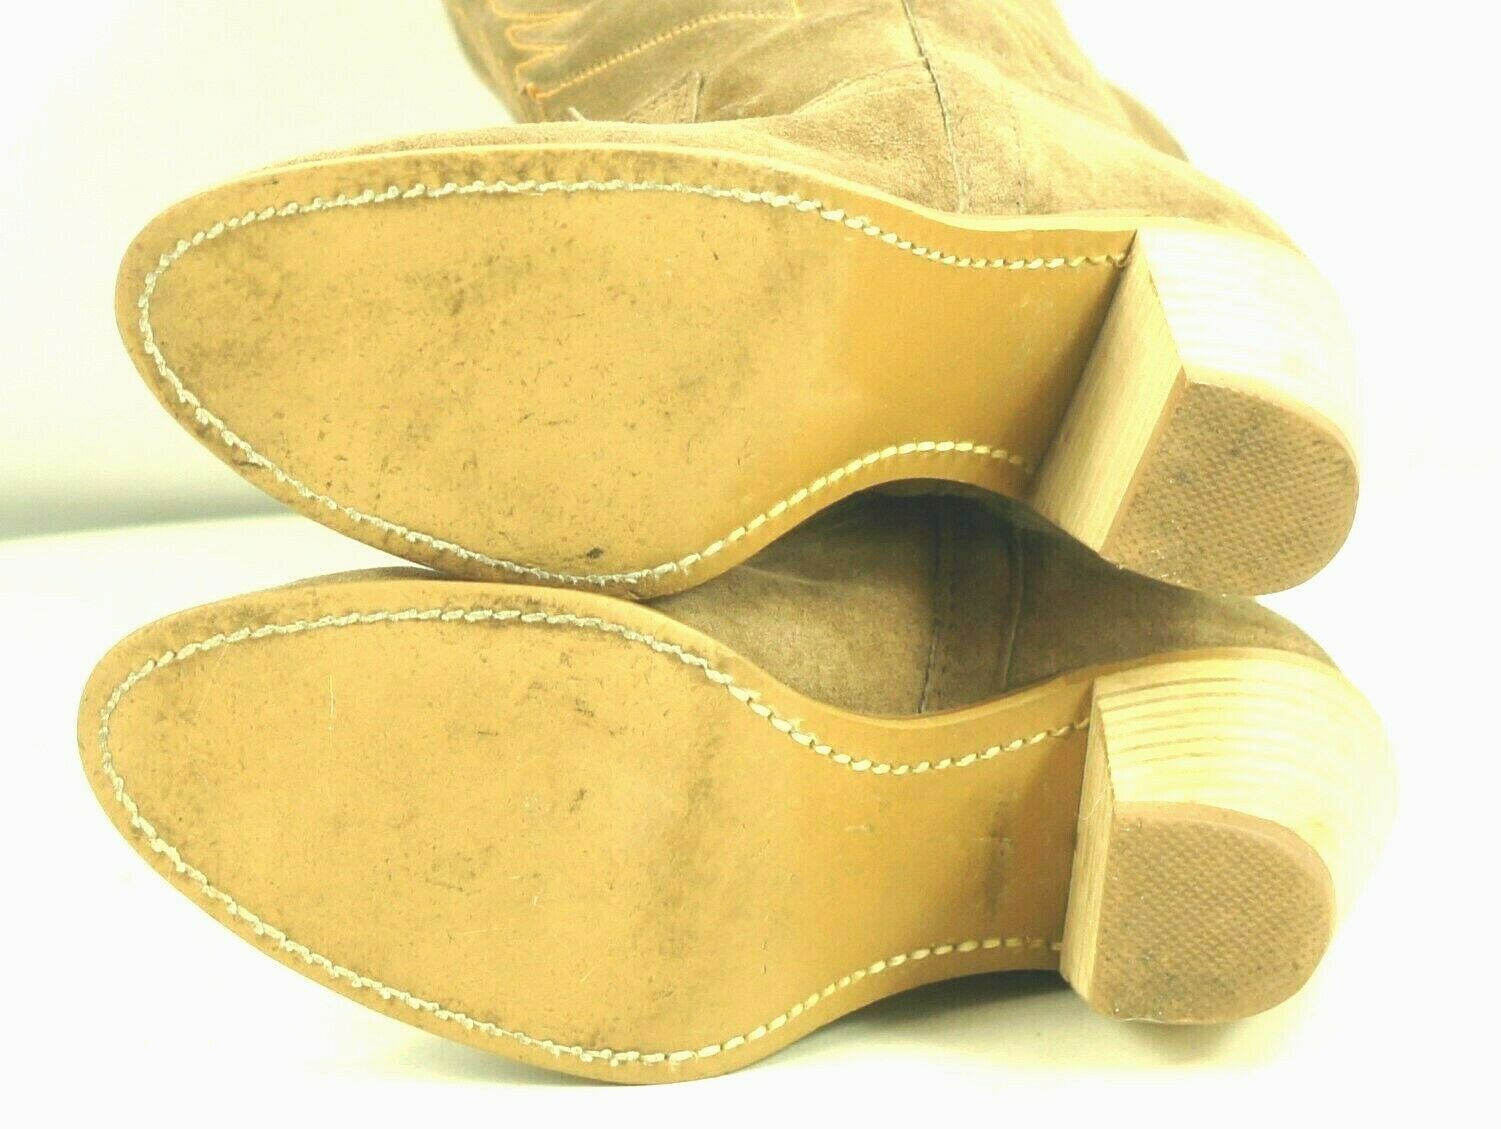 Acme Dingo Roughout Suede Cowboy Boots 3-Inch Heel Vintage US Made ...